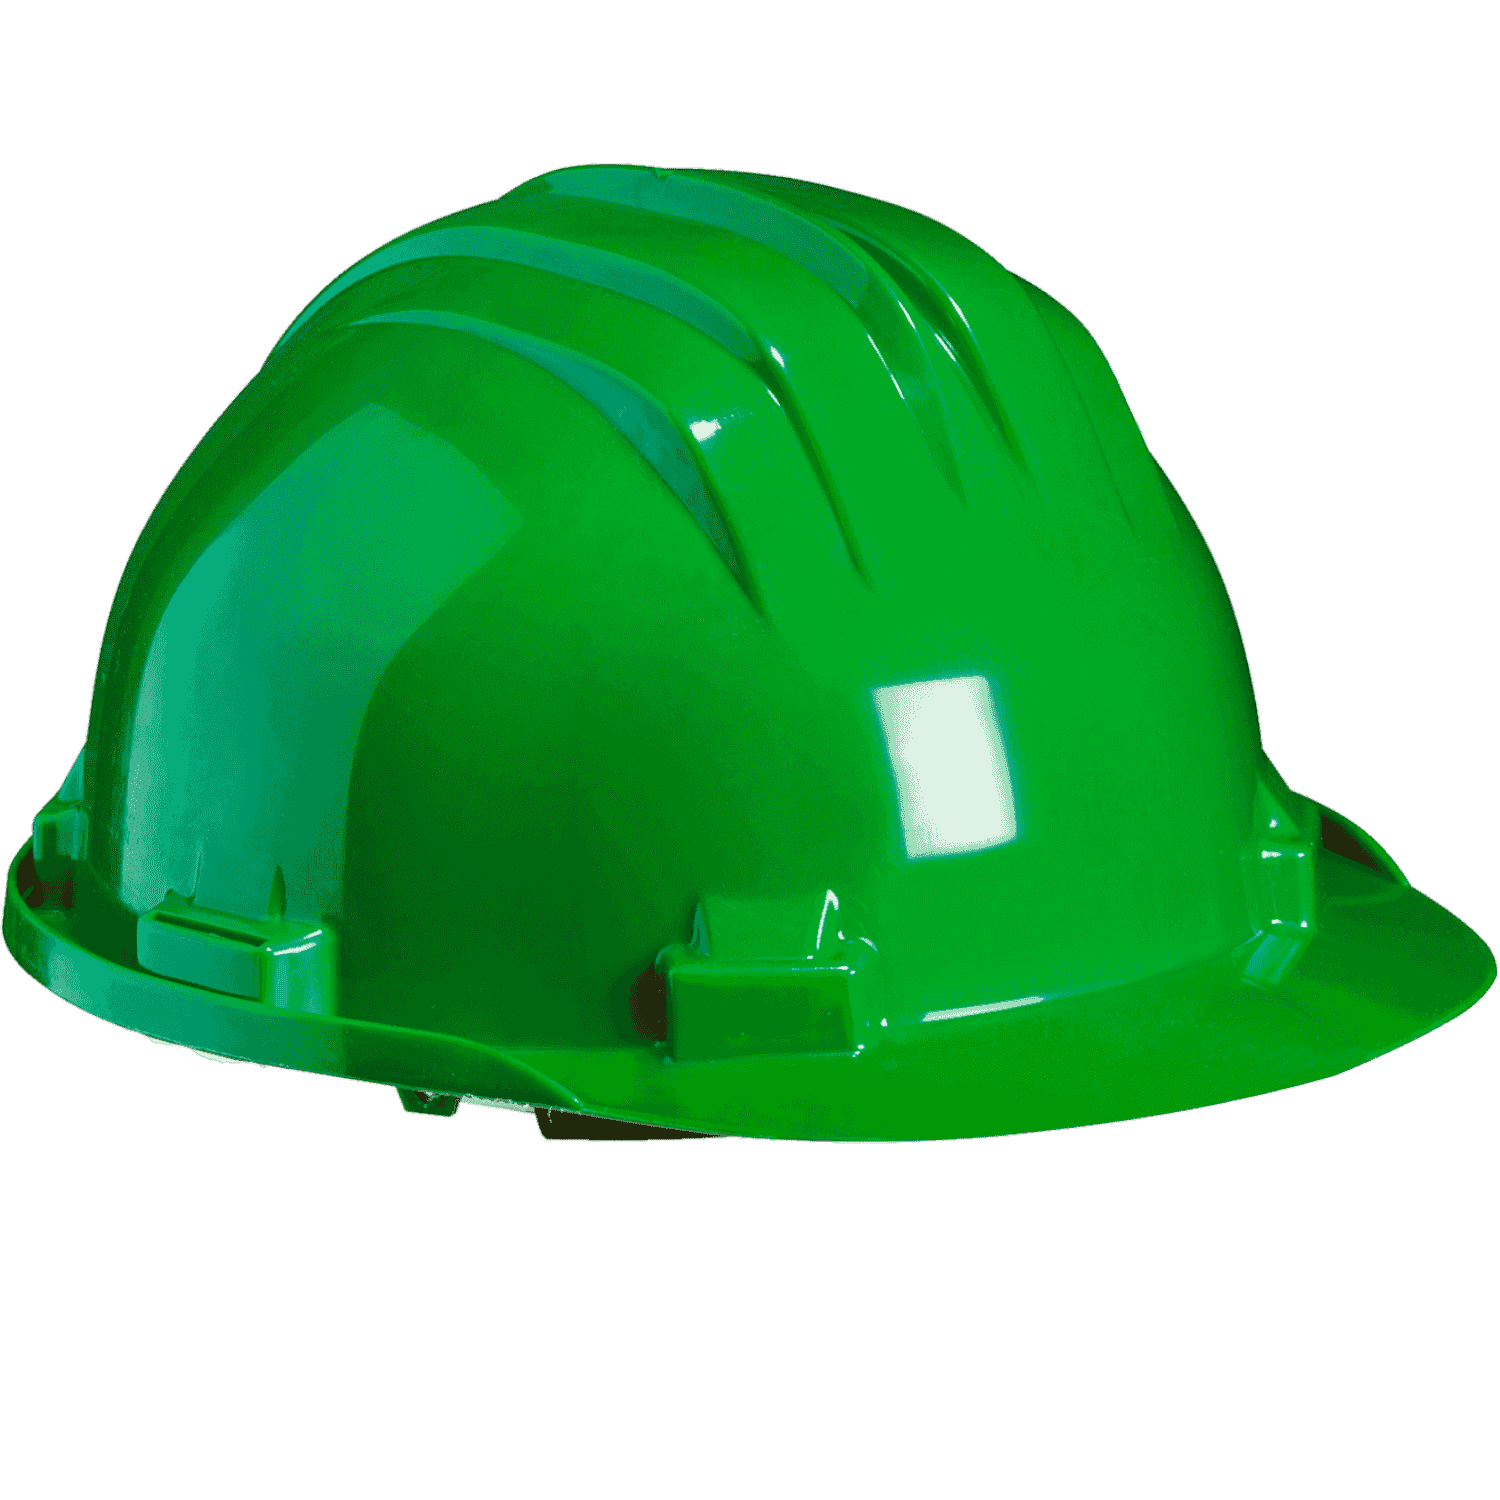 Climax 5-RS Manual Adjustment Safety Helmet Green